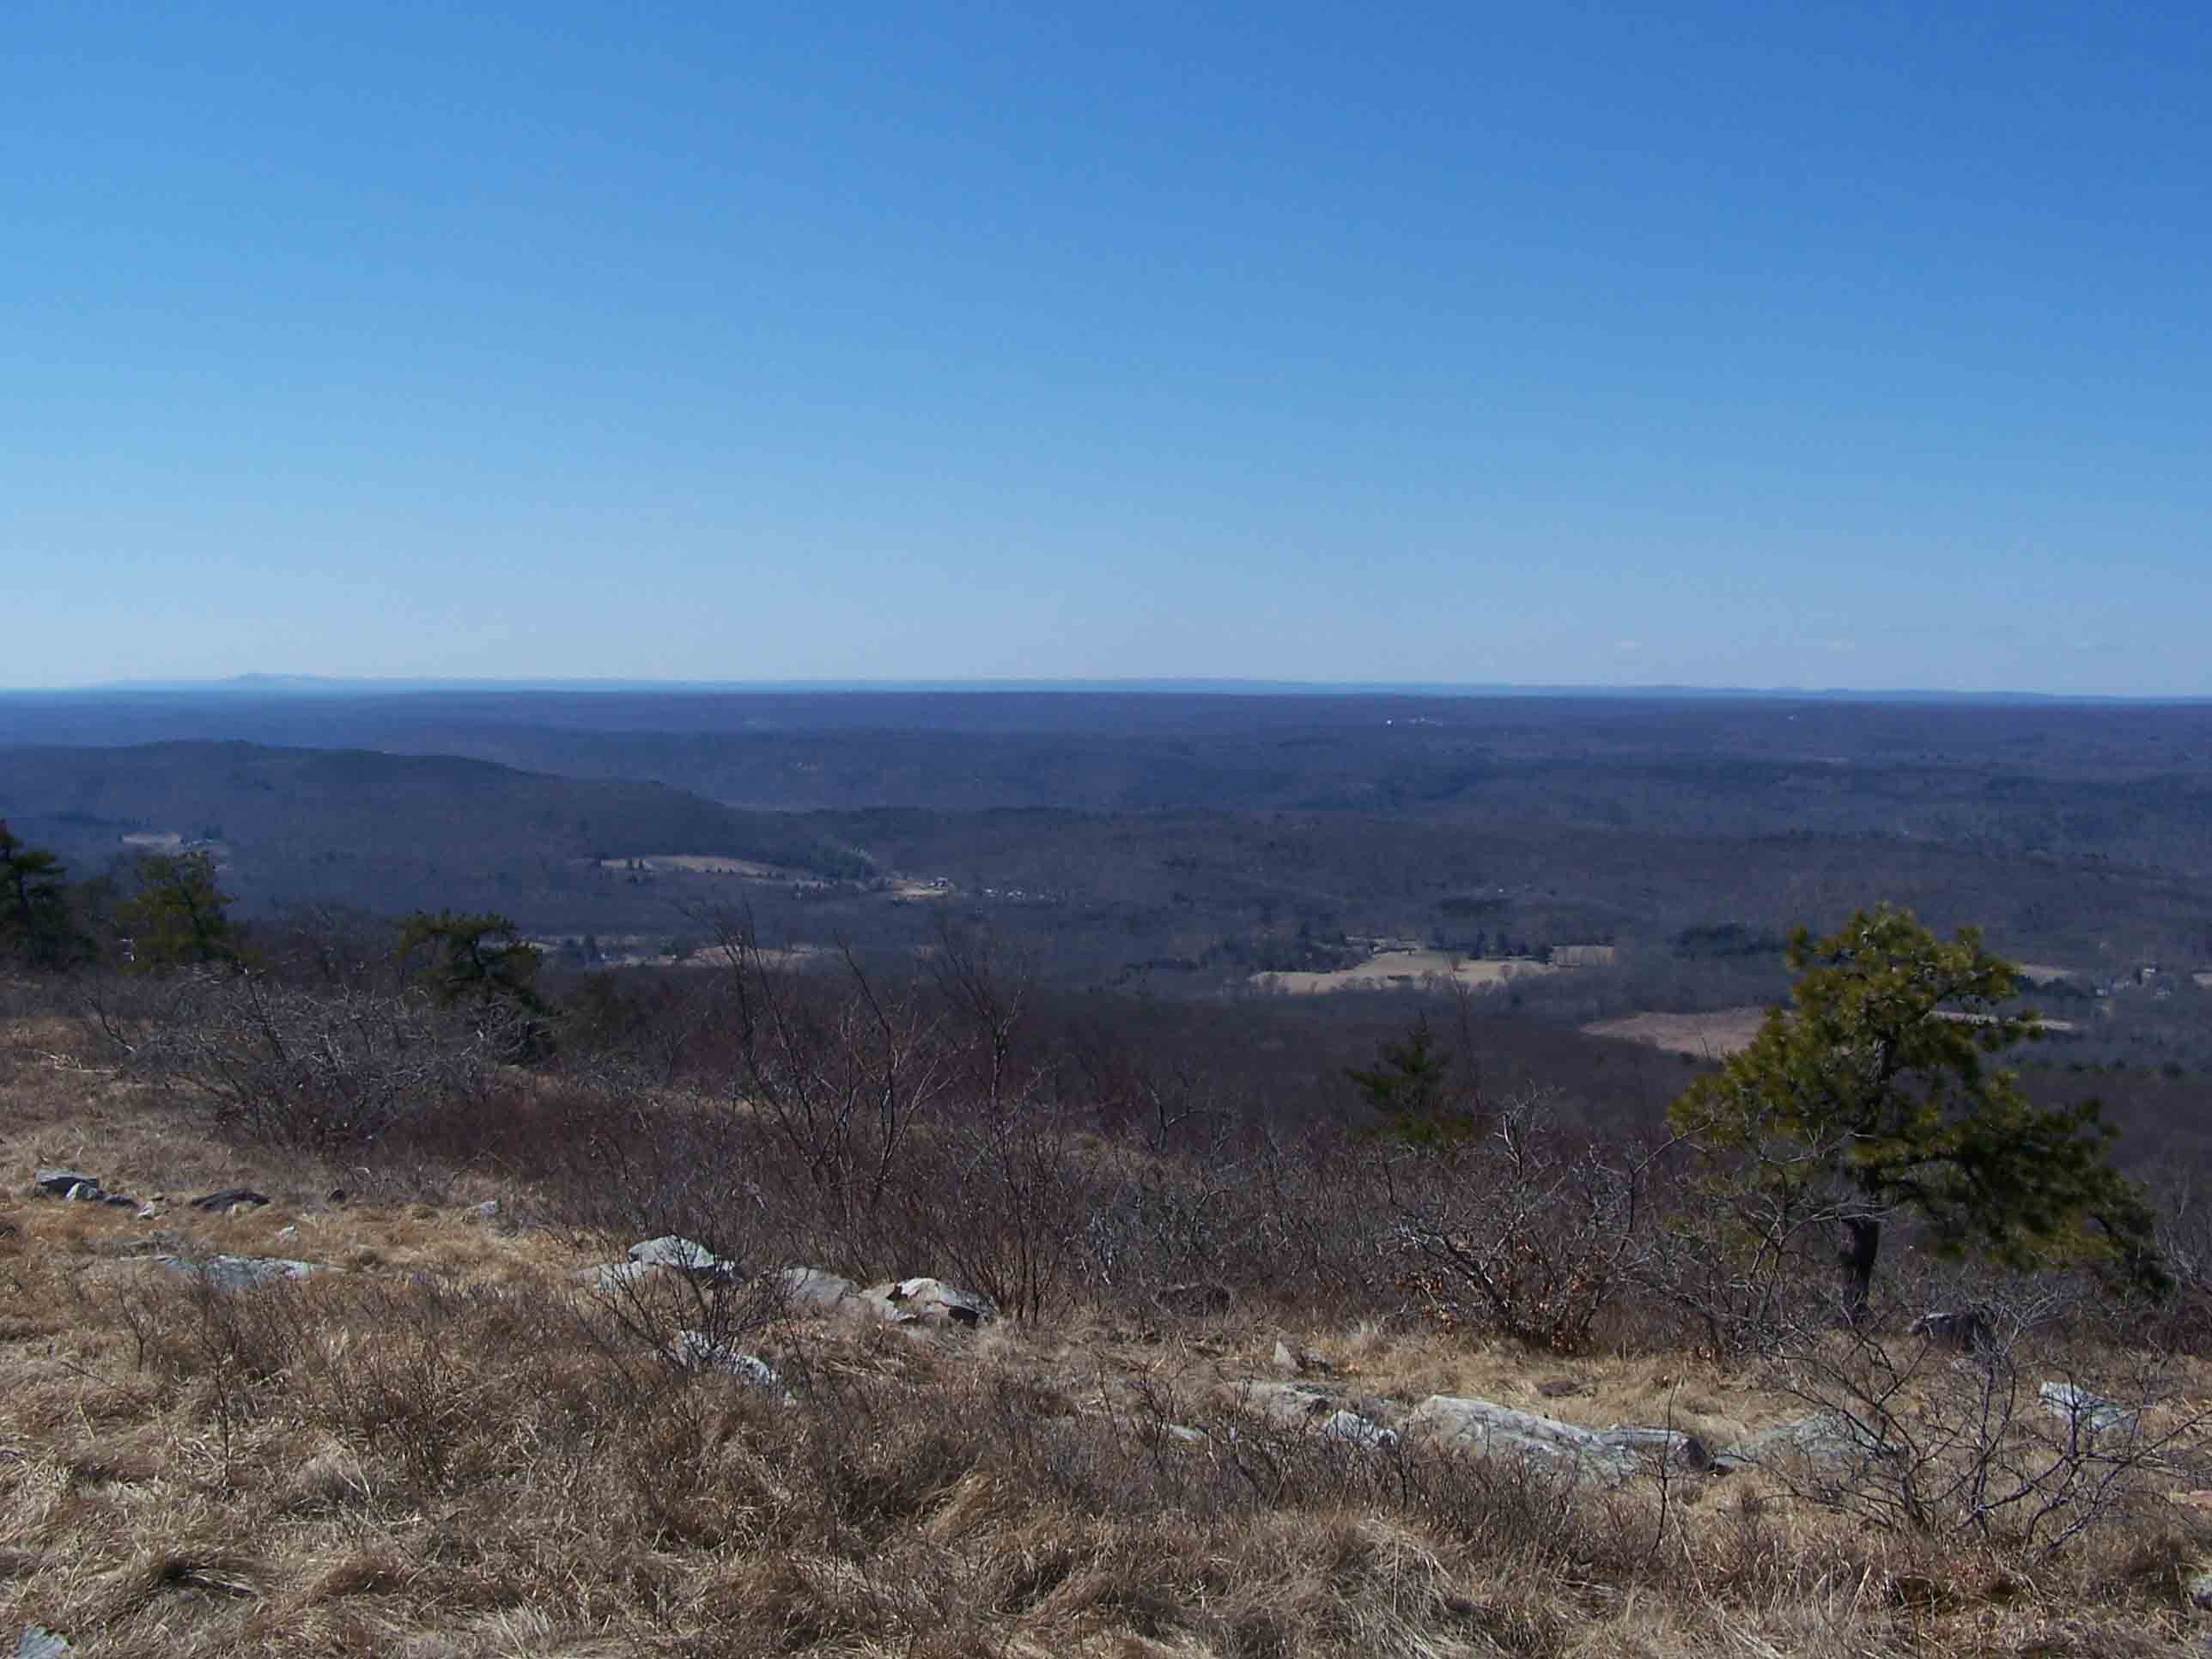 mm 4.3 - Views over the Wallpack Valley and the Pocono Plateau. Courtesy at@rohland.org